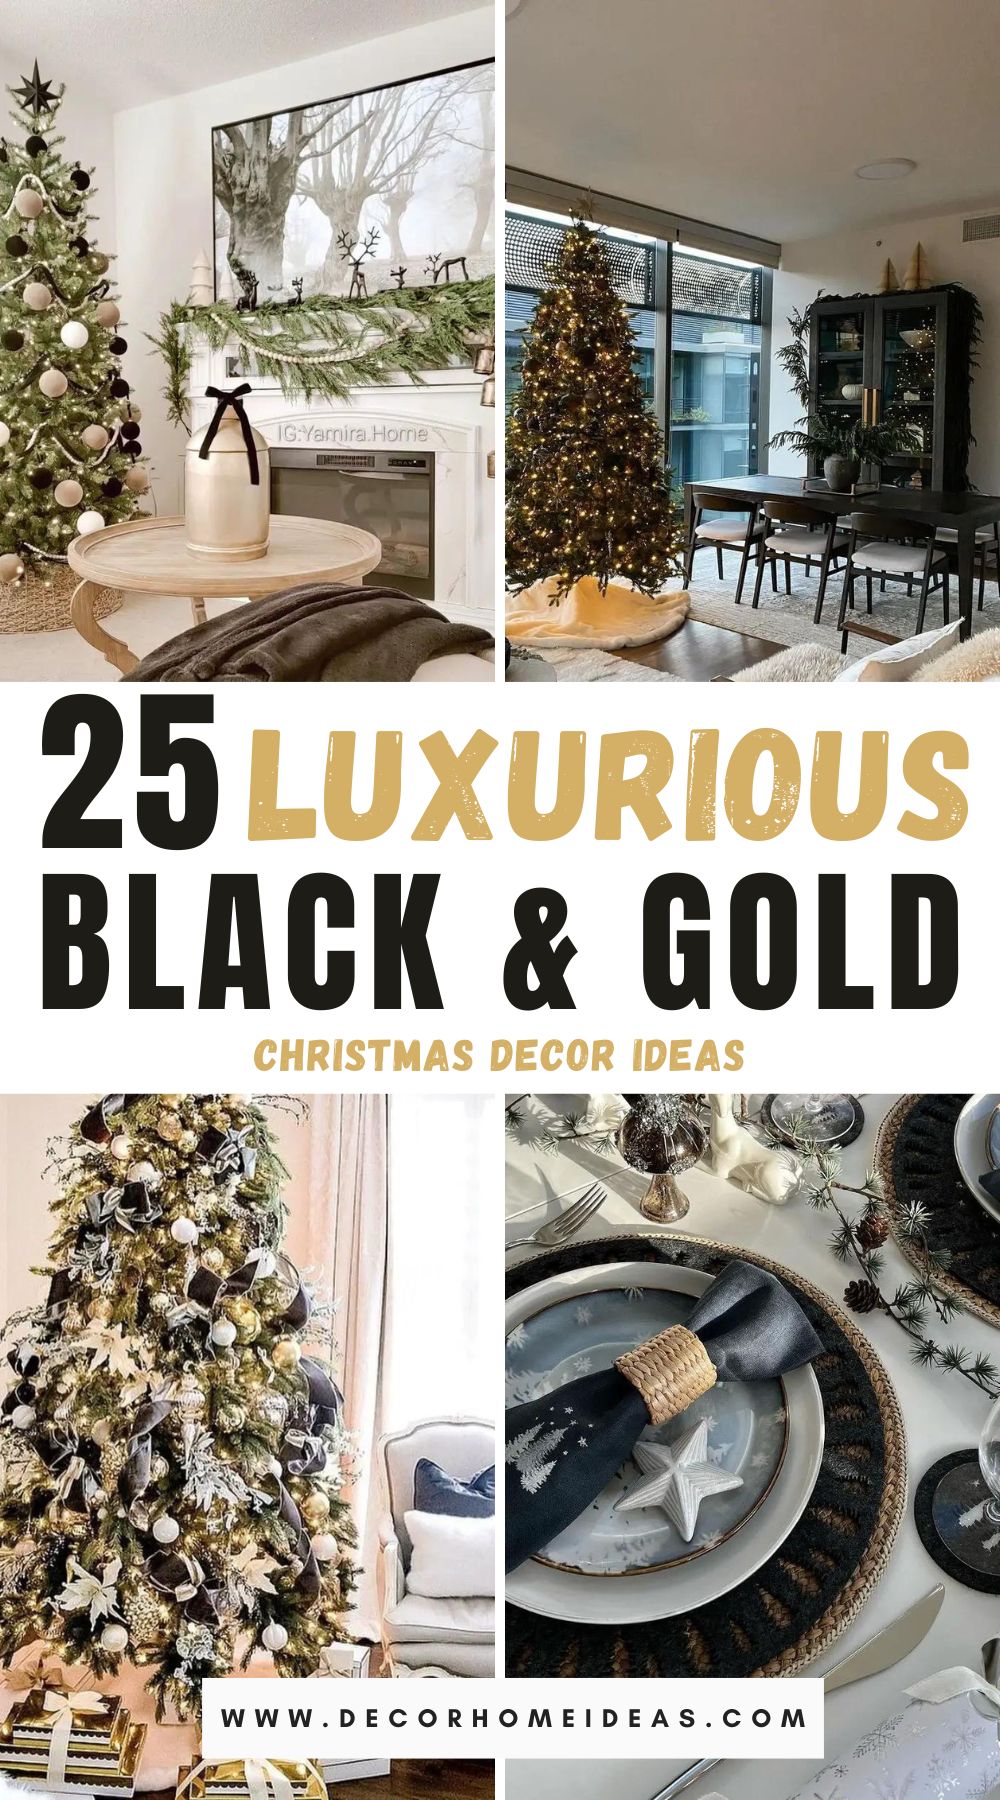 Looking to shine this holiday season? Explore 25 luxurious black and gold Christmas decor ideas. Wondering how these opulent accents can transform your space? Discover the magic of elegance.